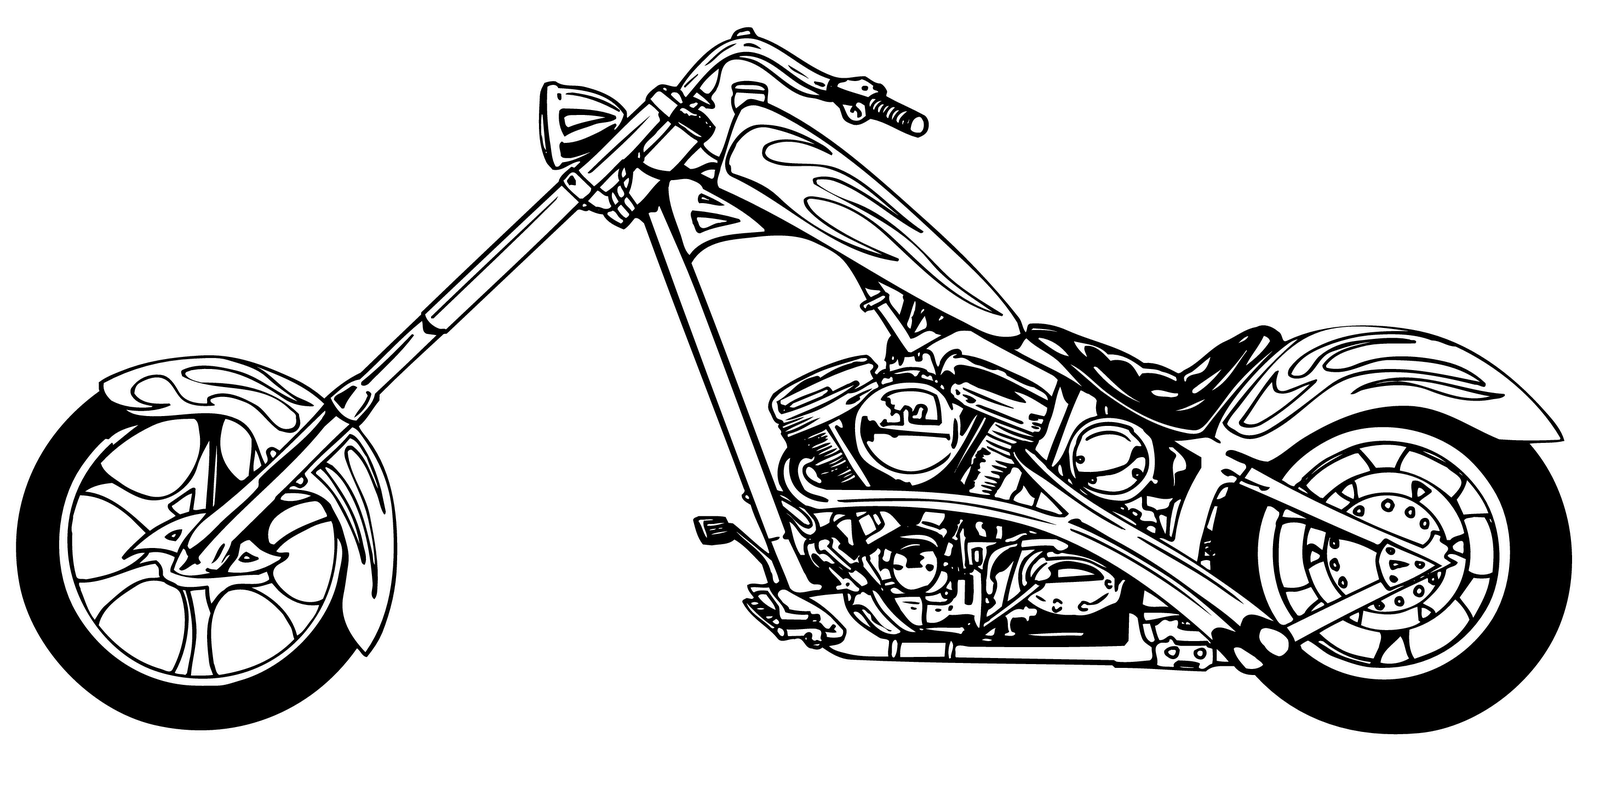 Motorcycle Images   Cliparts Co